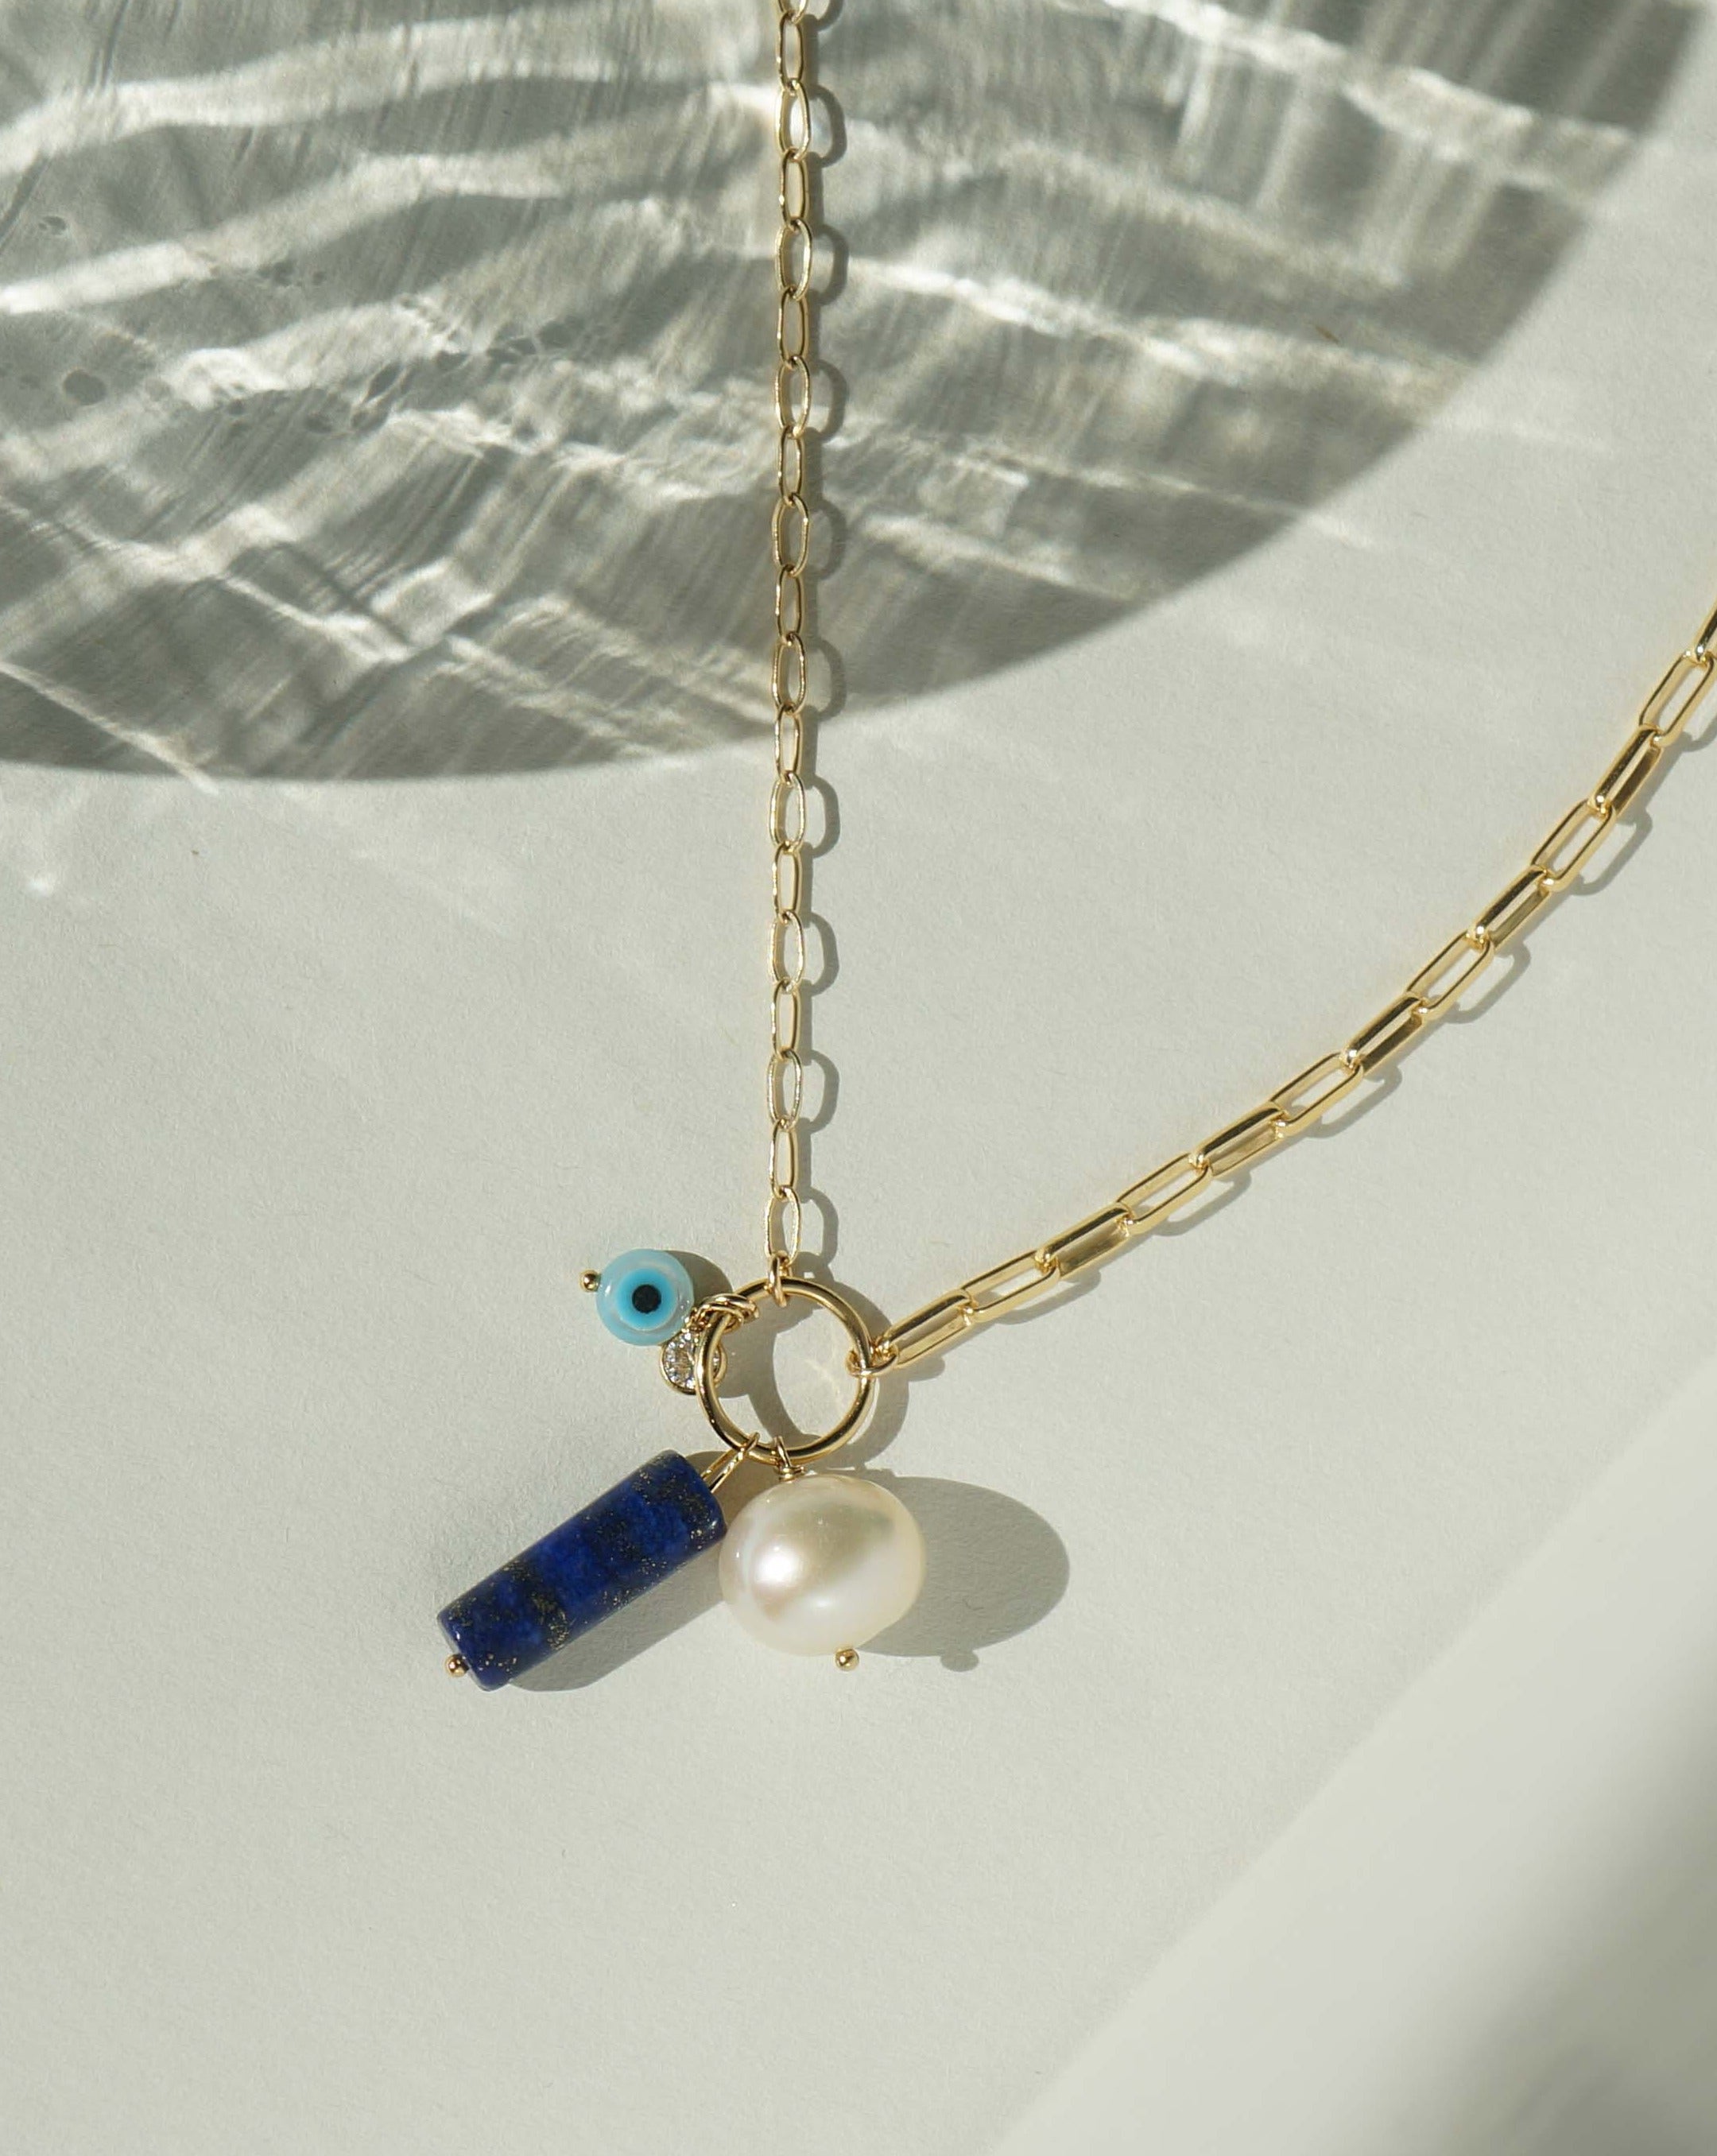 Lucky Necklace by KOZAKH. A 16 to 18 inch adjustable length necklace with flat link chain on one half and mini paperclip chain on the other half, crafted in 14K Gold Filled, featuring a cylindrical Lapis, a round Freshwater Pearl, and a hand carved Mother of Pearl Evil Eye.